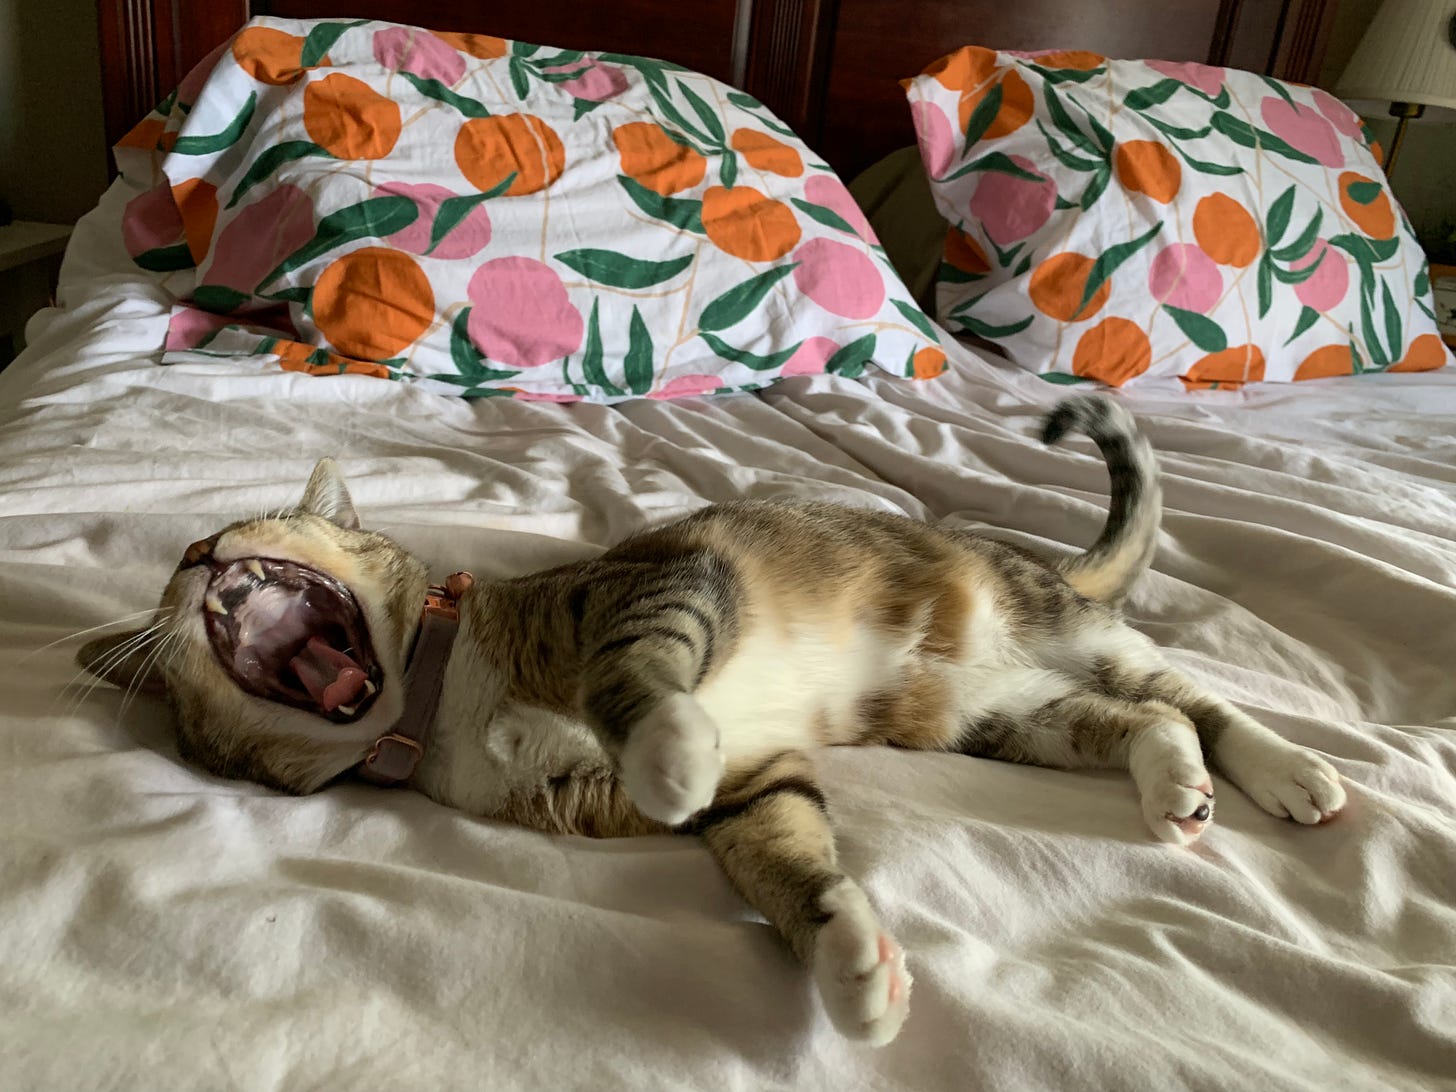 A tabby cate with a white stomach yawns on a bed with white linens and pillowcases adorned with pink and orange peaches